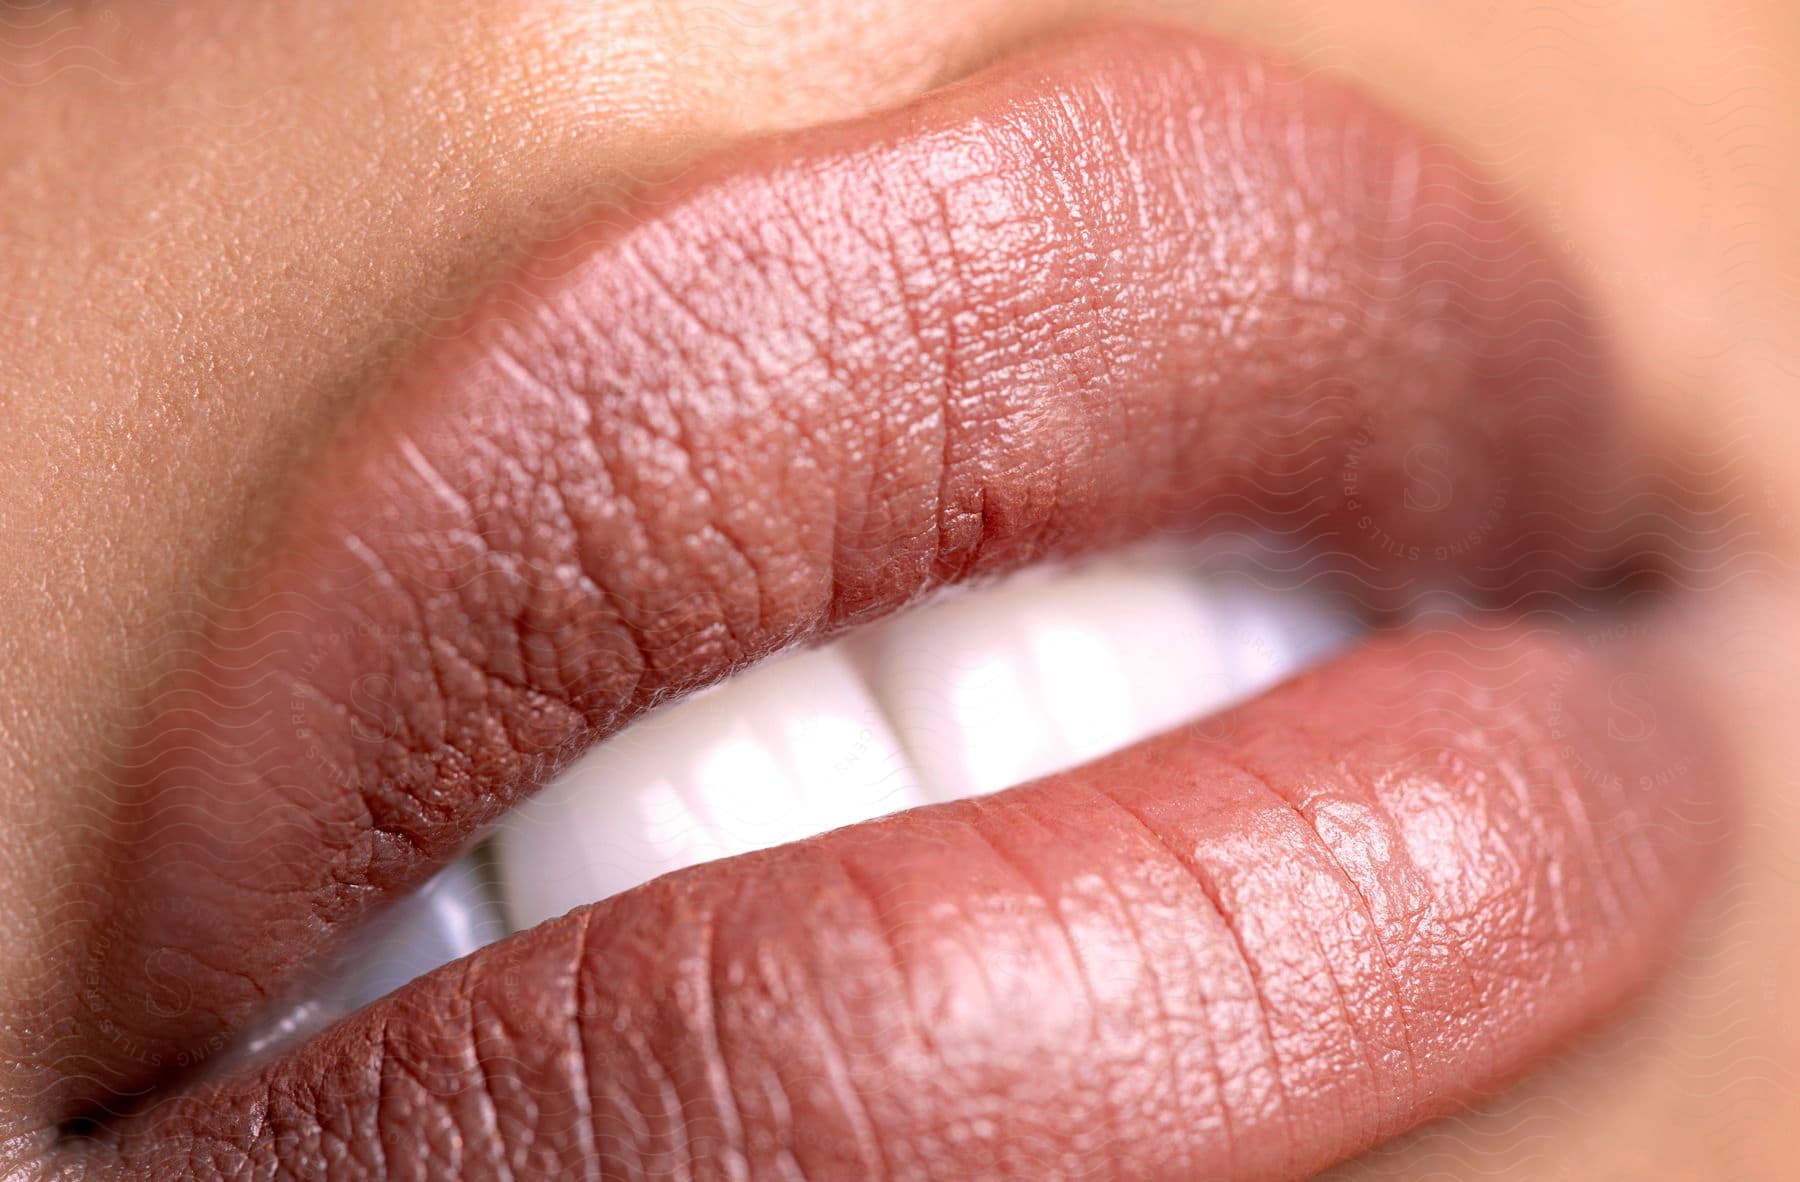 Extreme close up of a woman's lips with lipstick